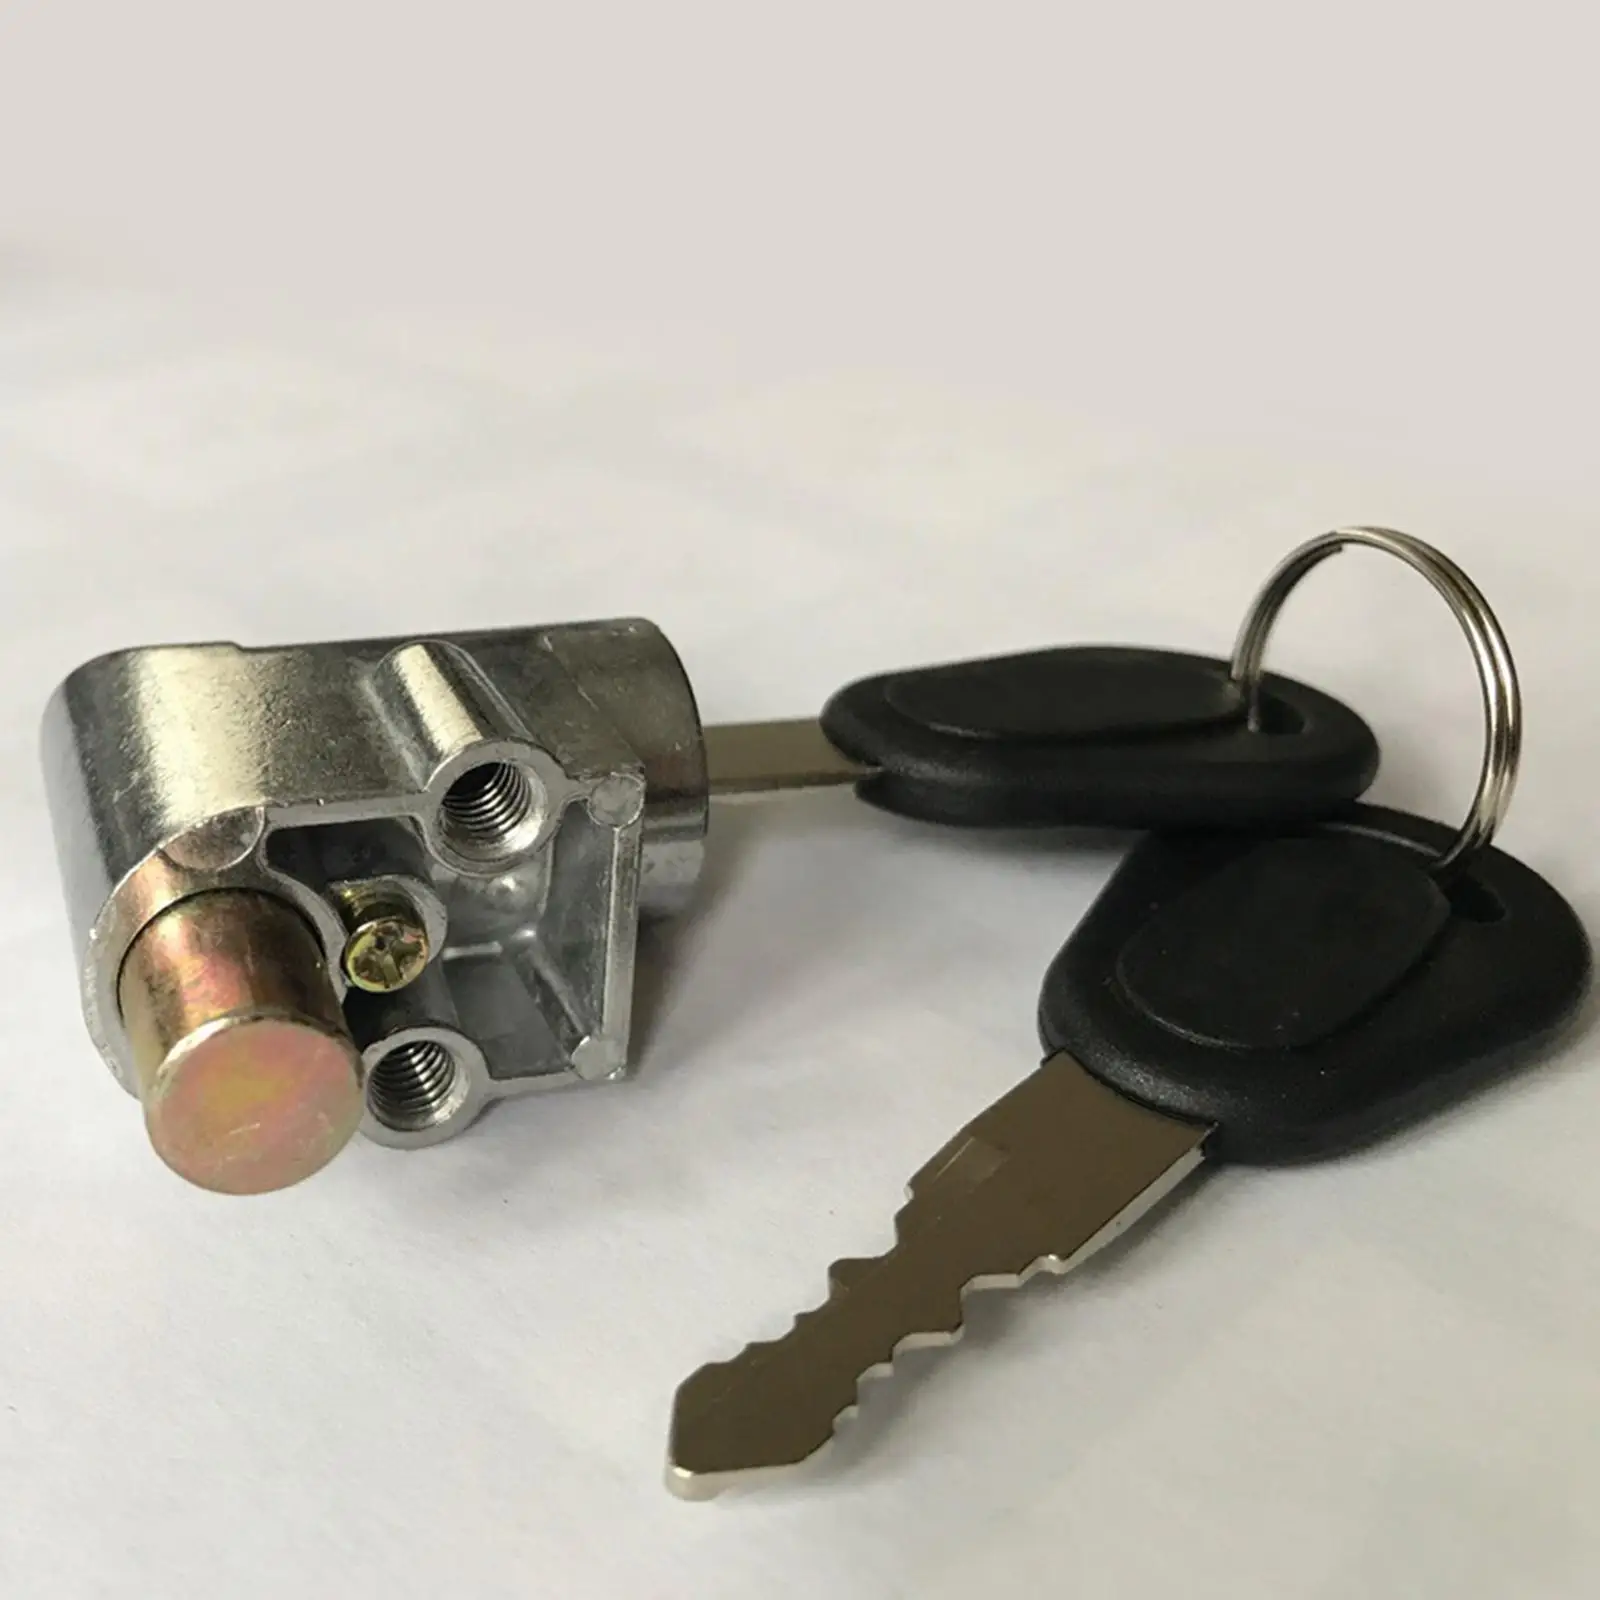 Motorcycle Ignition Lock Anti-thieves with 2 Key Durable Battery Cylinder Lock